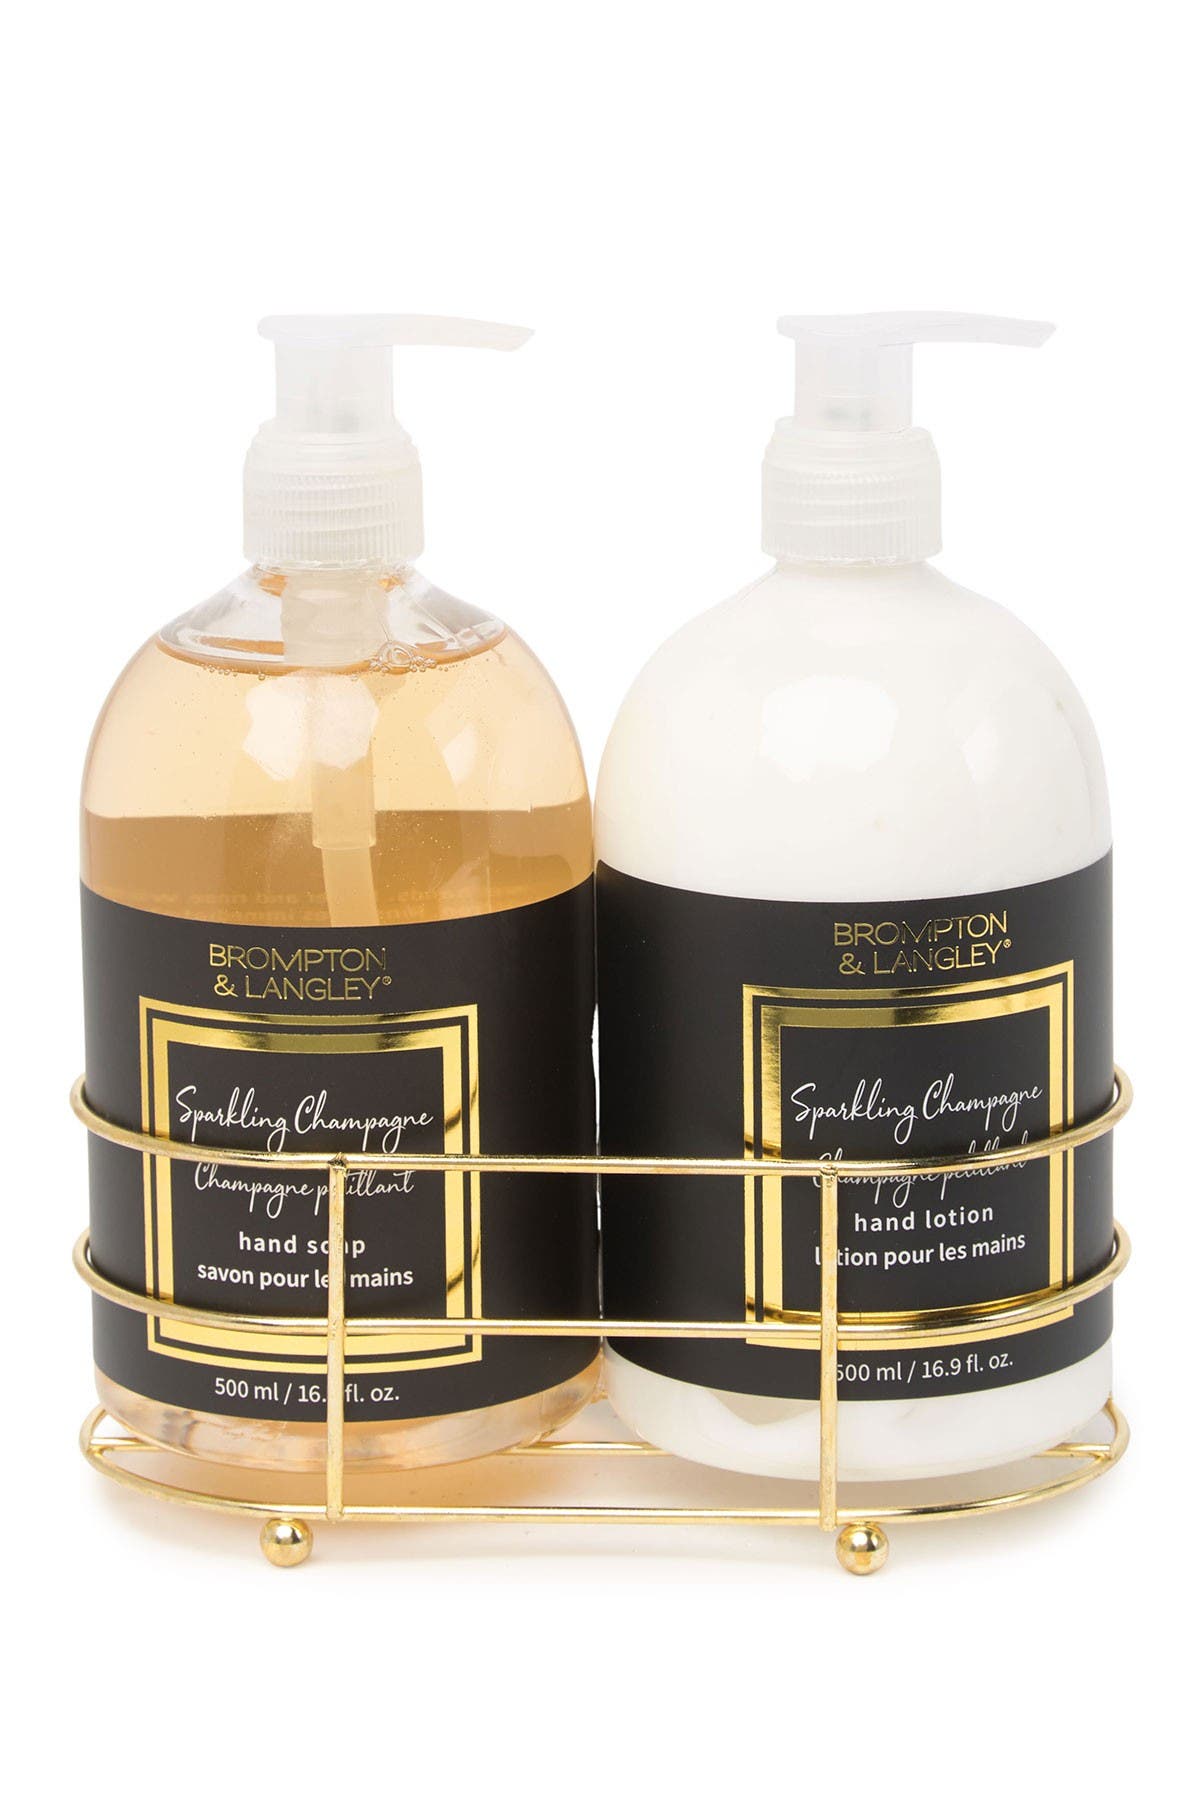 Upper Canada Soaps Hand Wash And Lotion Caddy Set